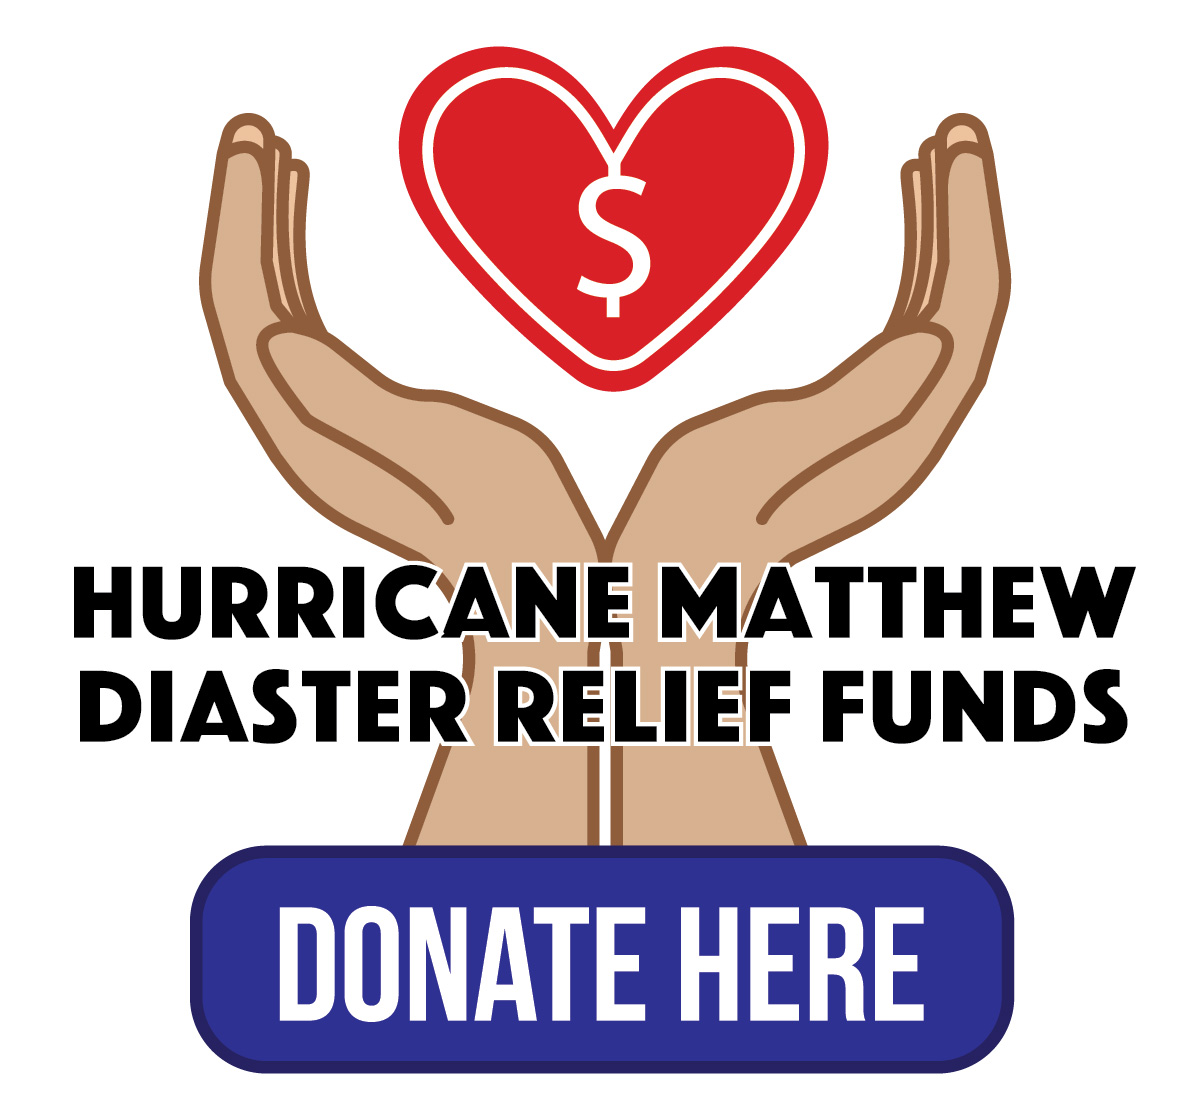 Support The Relief Funds for Hurricane Matthew